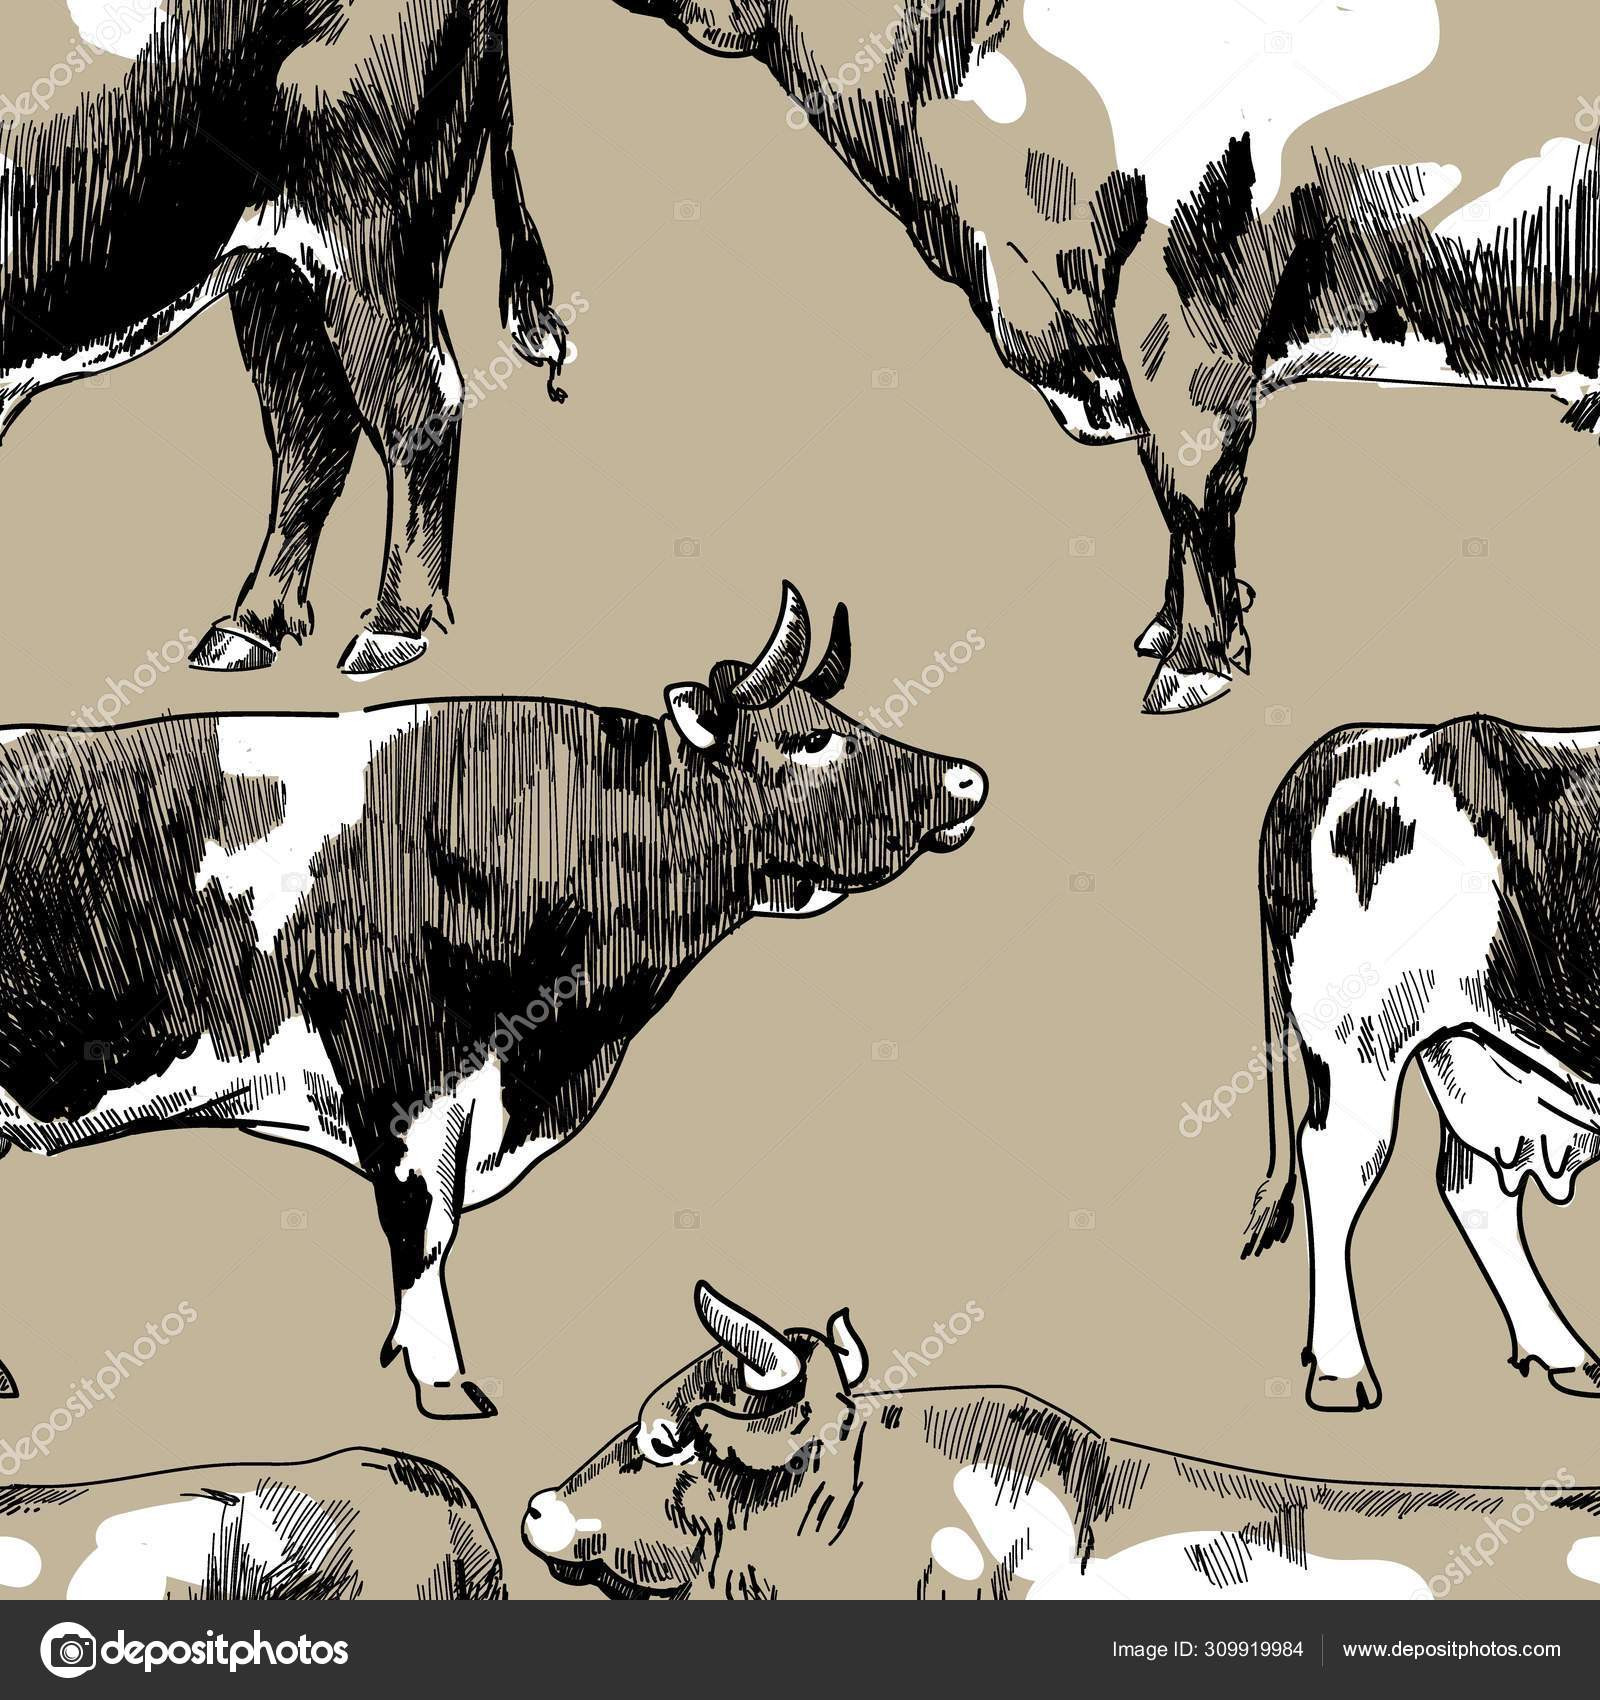 depositphotos stock illustration seamless pattern cows freehand drawing